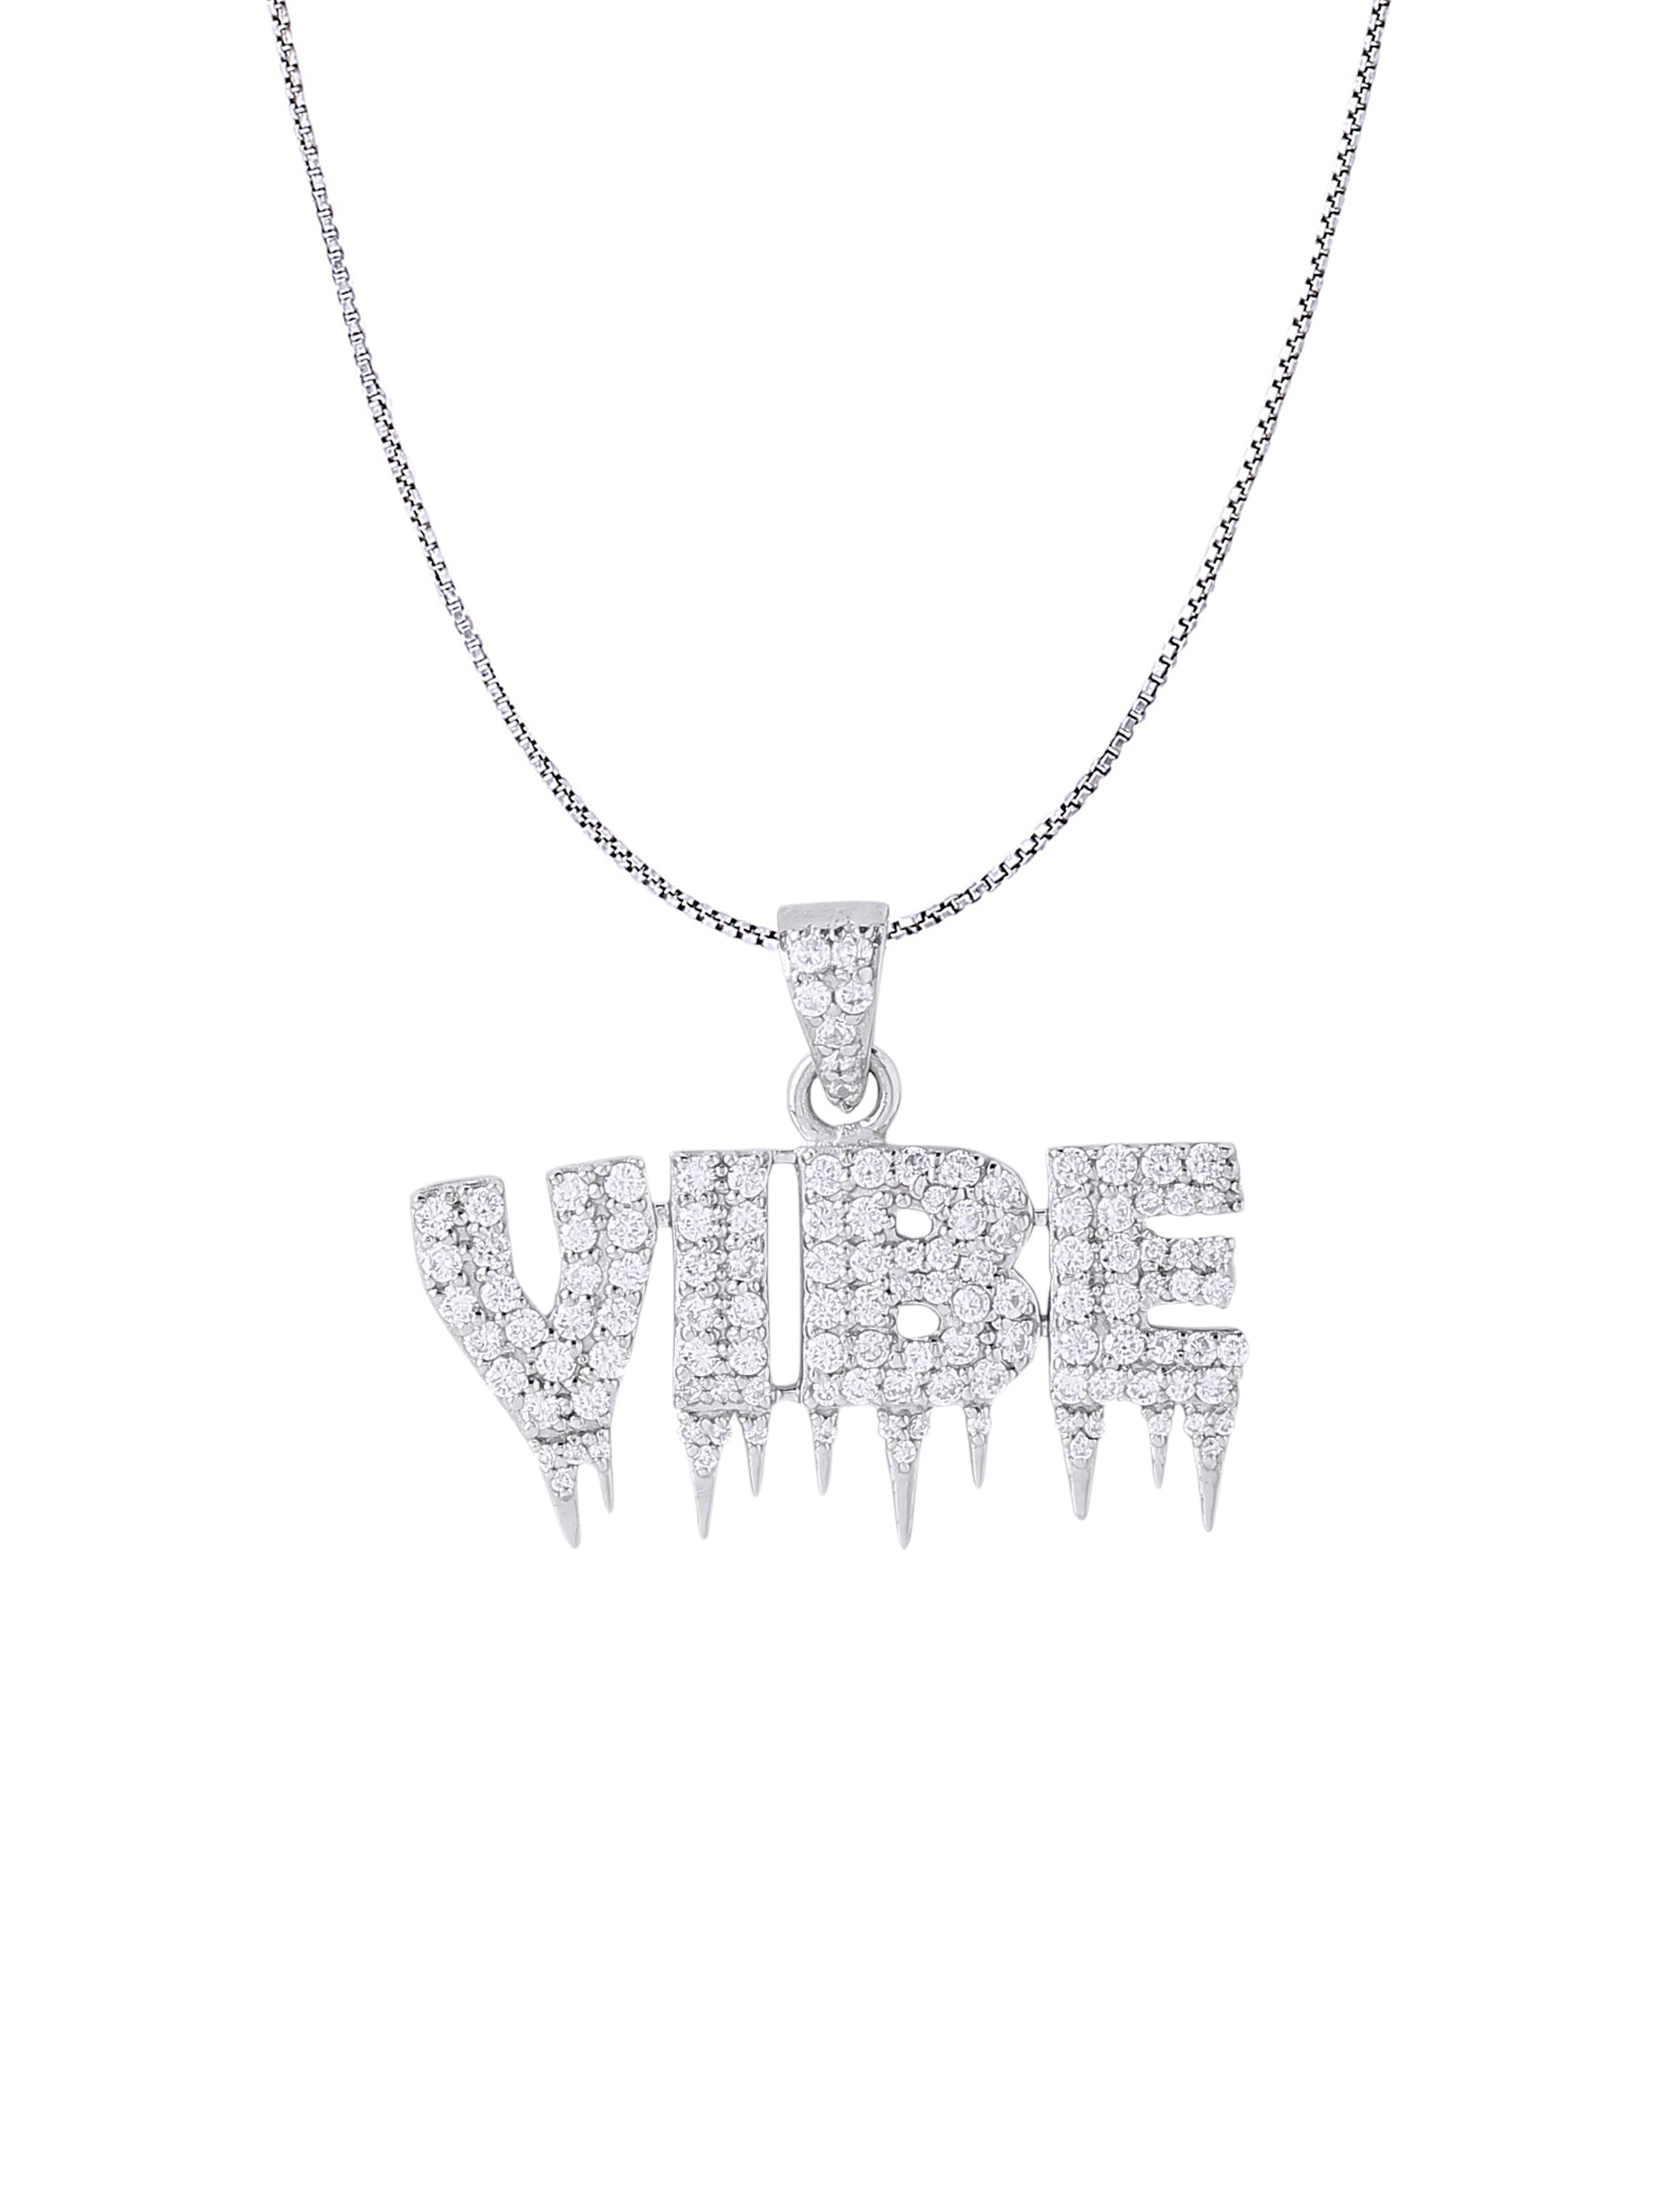 White Gold Color VIBE Pendant Made of 925 Sterling Silver Material with 20 Inch Long Silver Chain